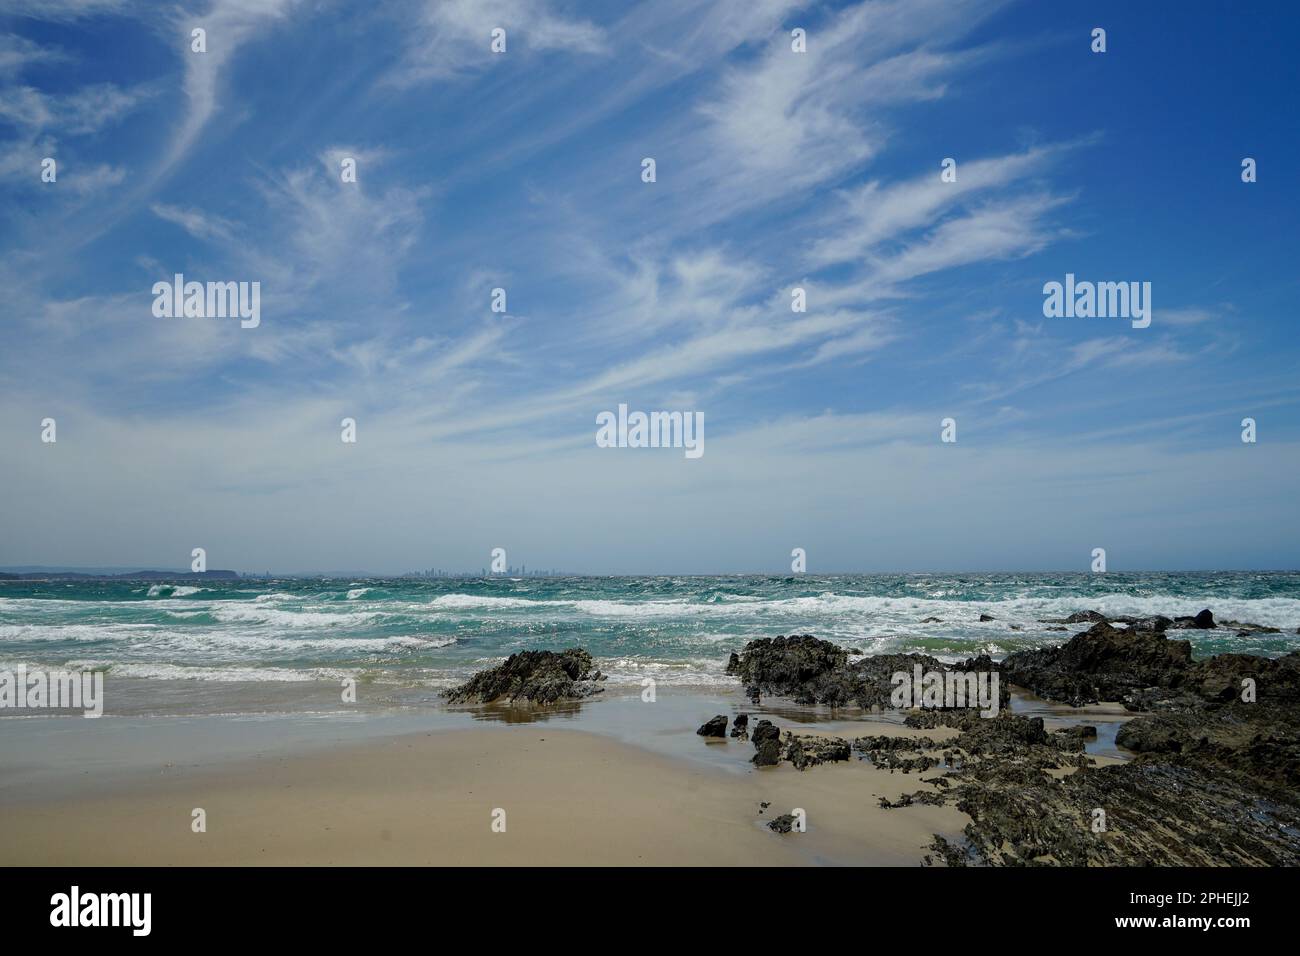 Surf beach on a windy day. View from sandy shore over rocks and surf to city skyline on the horizon, with windswept cirrus clouds against a blue sky. Stock Photo